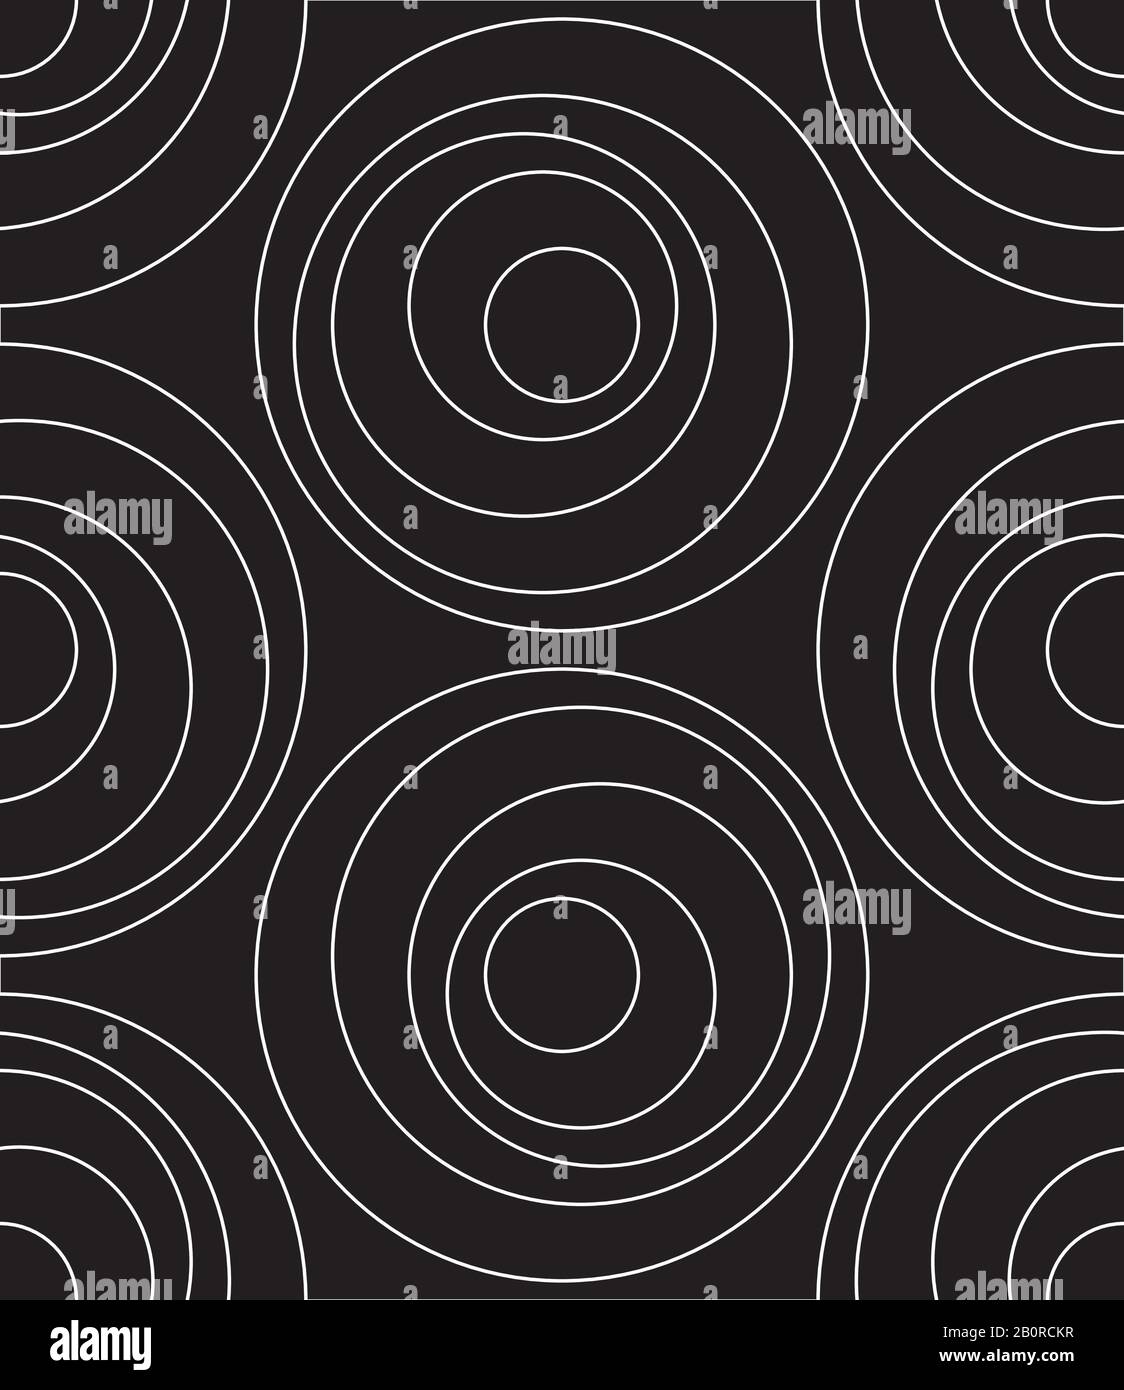 Black and white concentric circles seamless pattern. Stock Vector